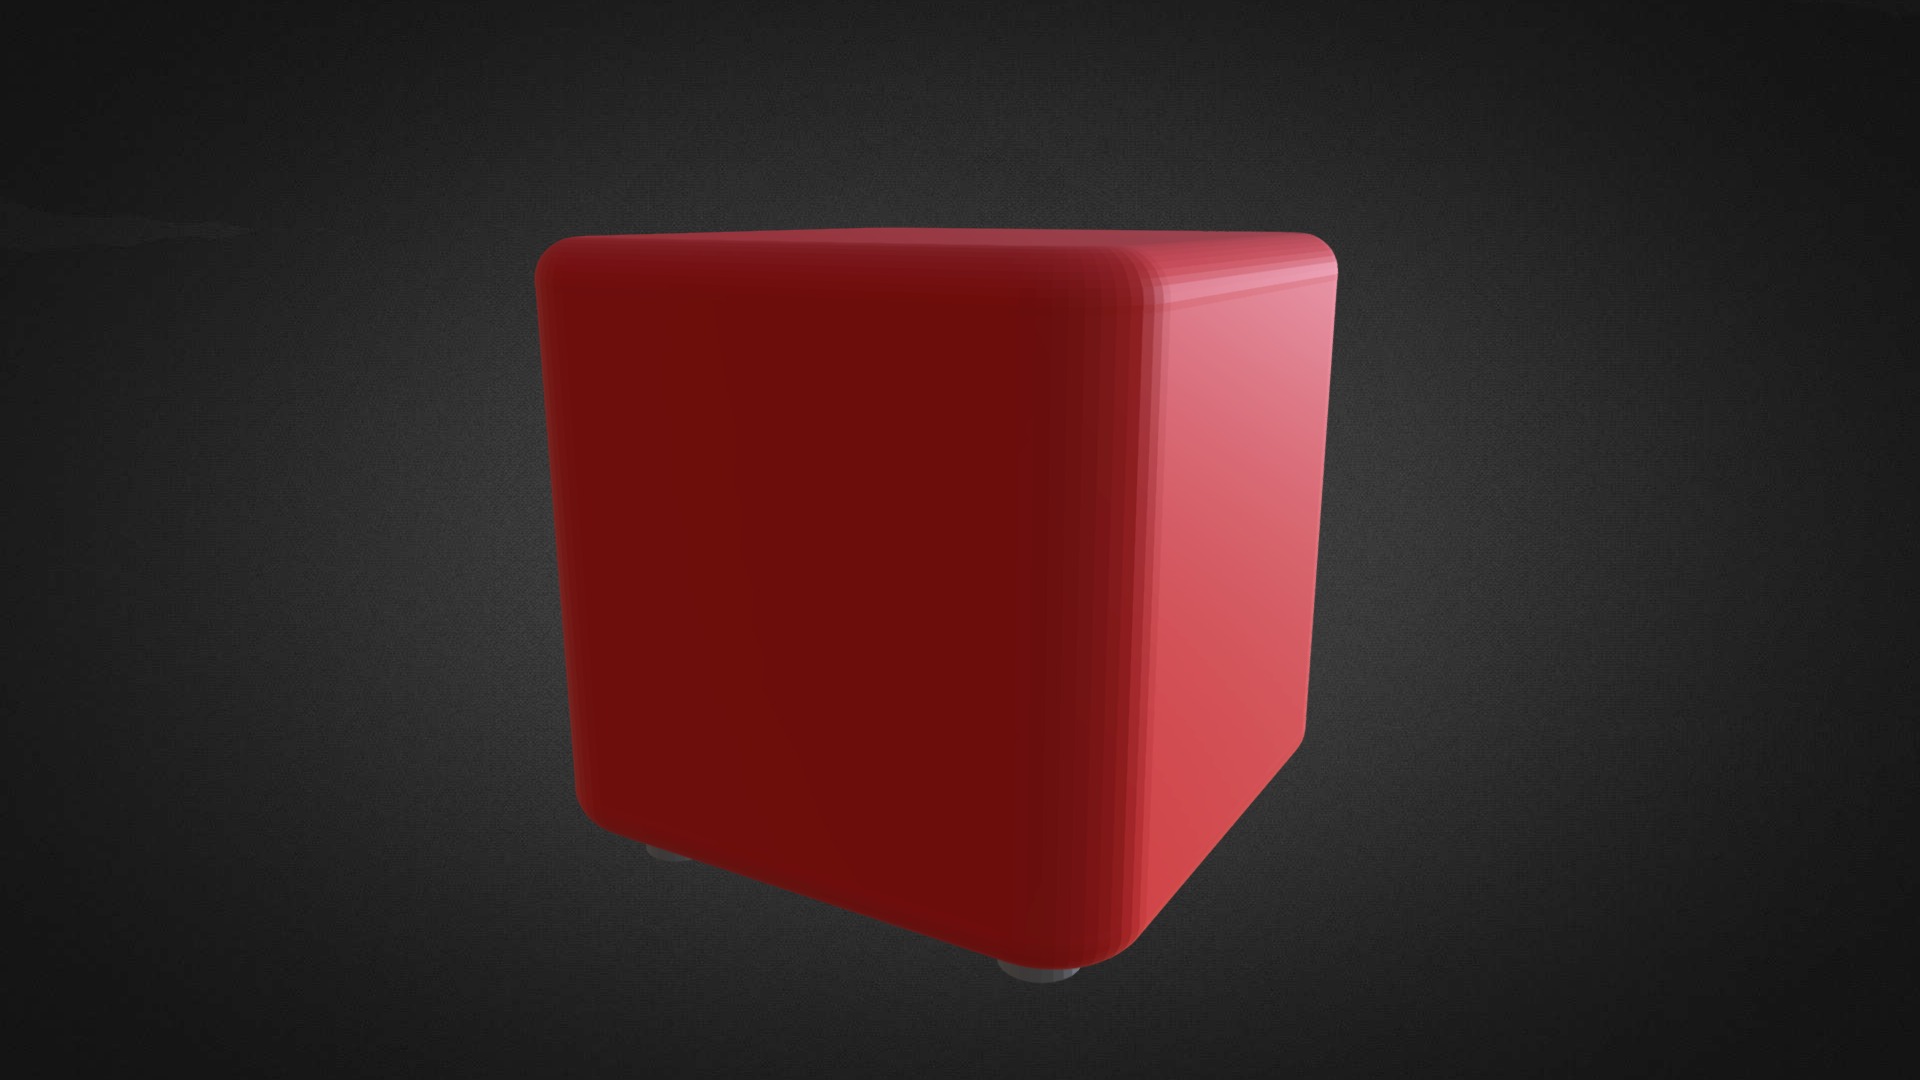 3D model 500mm Cube - This is a 3D model of the 500mm Cube. The 3D model is about a red square with a black background.